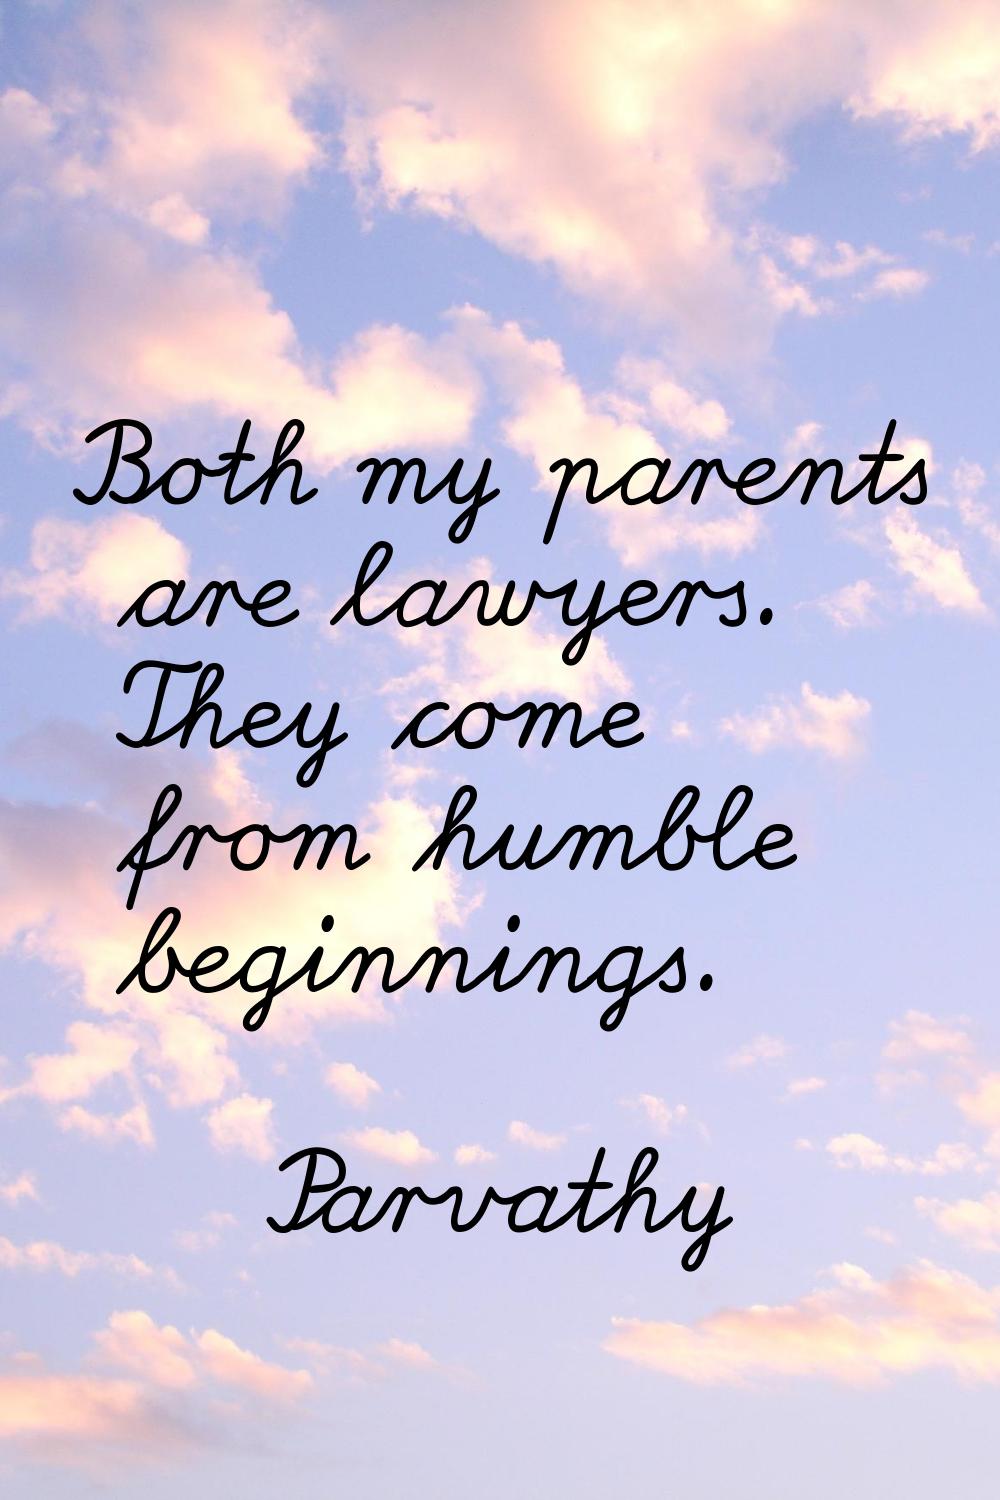 Both my parents are lawyers. They come from humble beginnings.